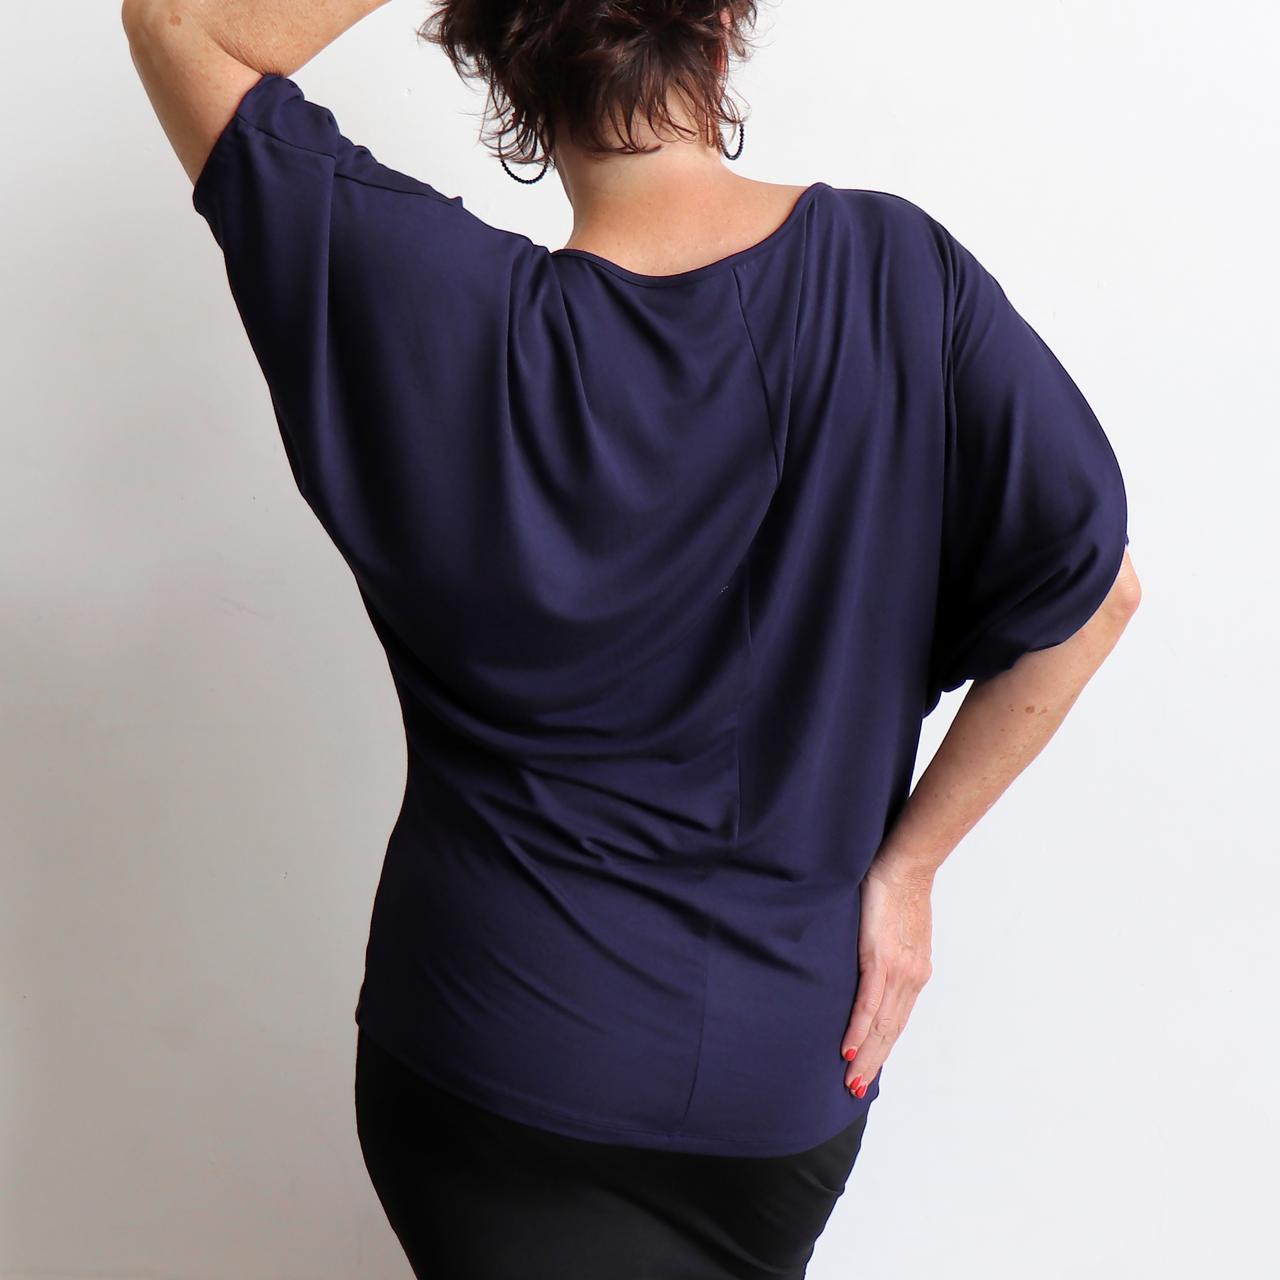 Stand By Me Top by KOBOMO - batwing t-shirt ethically made in bamboo